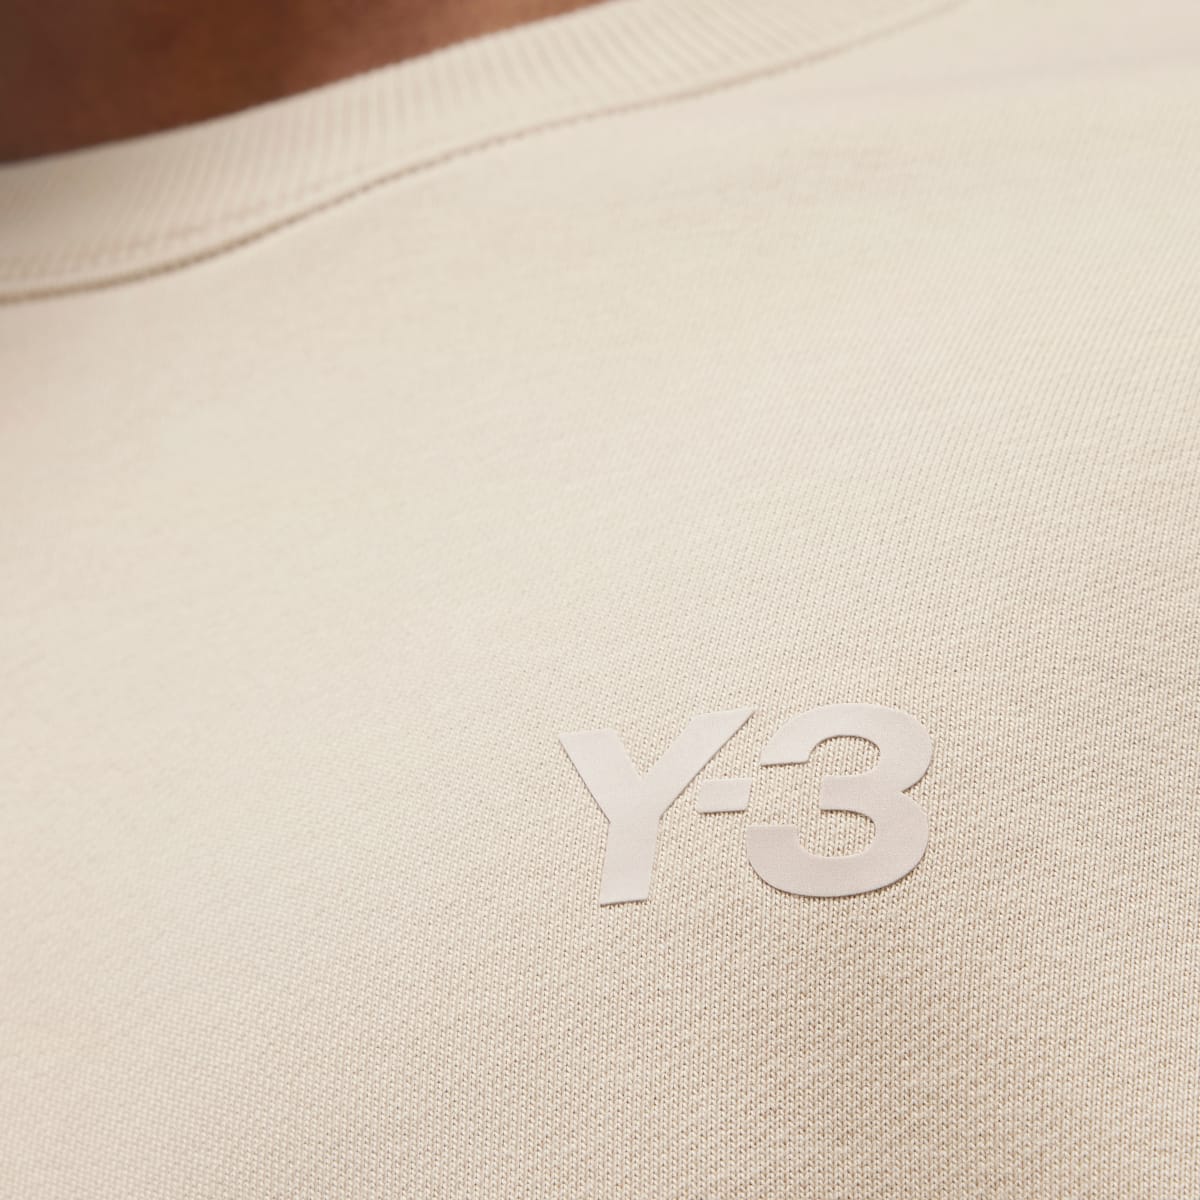 Adidas Y-3 French Terry Crew Sweater. 6